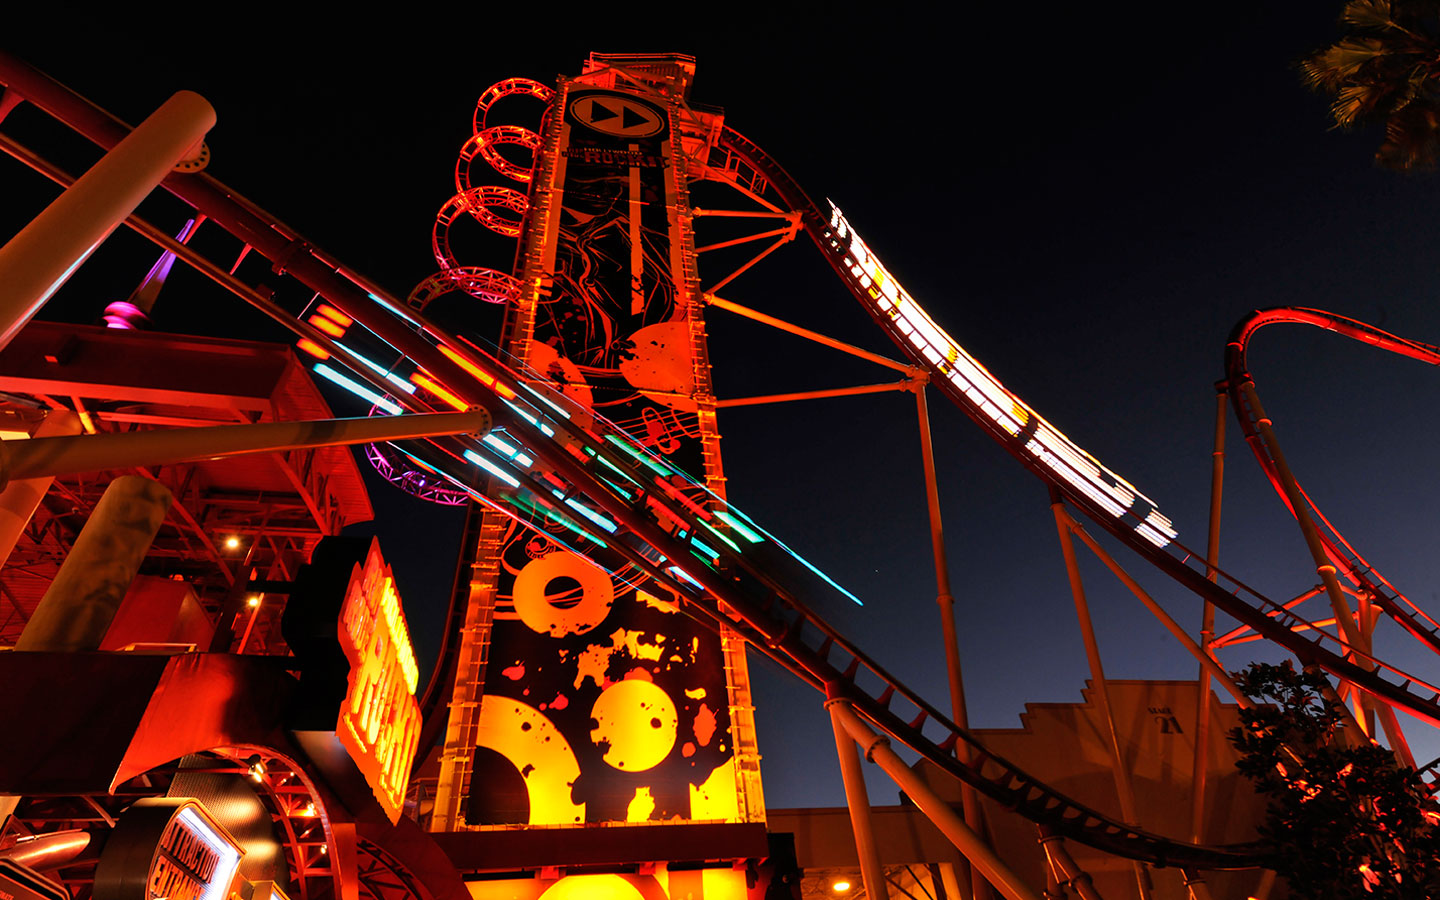 Take a ride on Hollywood Rip Ride Rockit at night during Universal Orlando's Halloween Horror Nights.